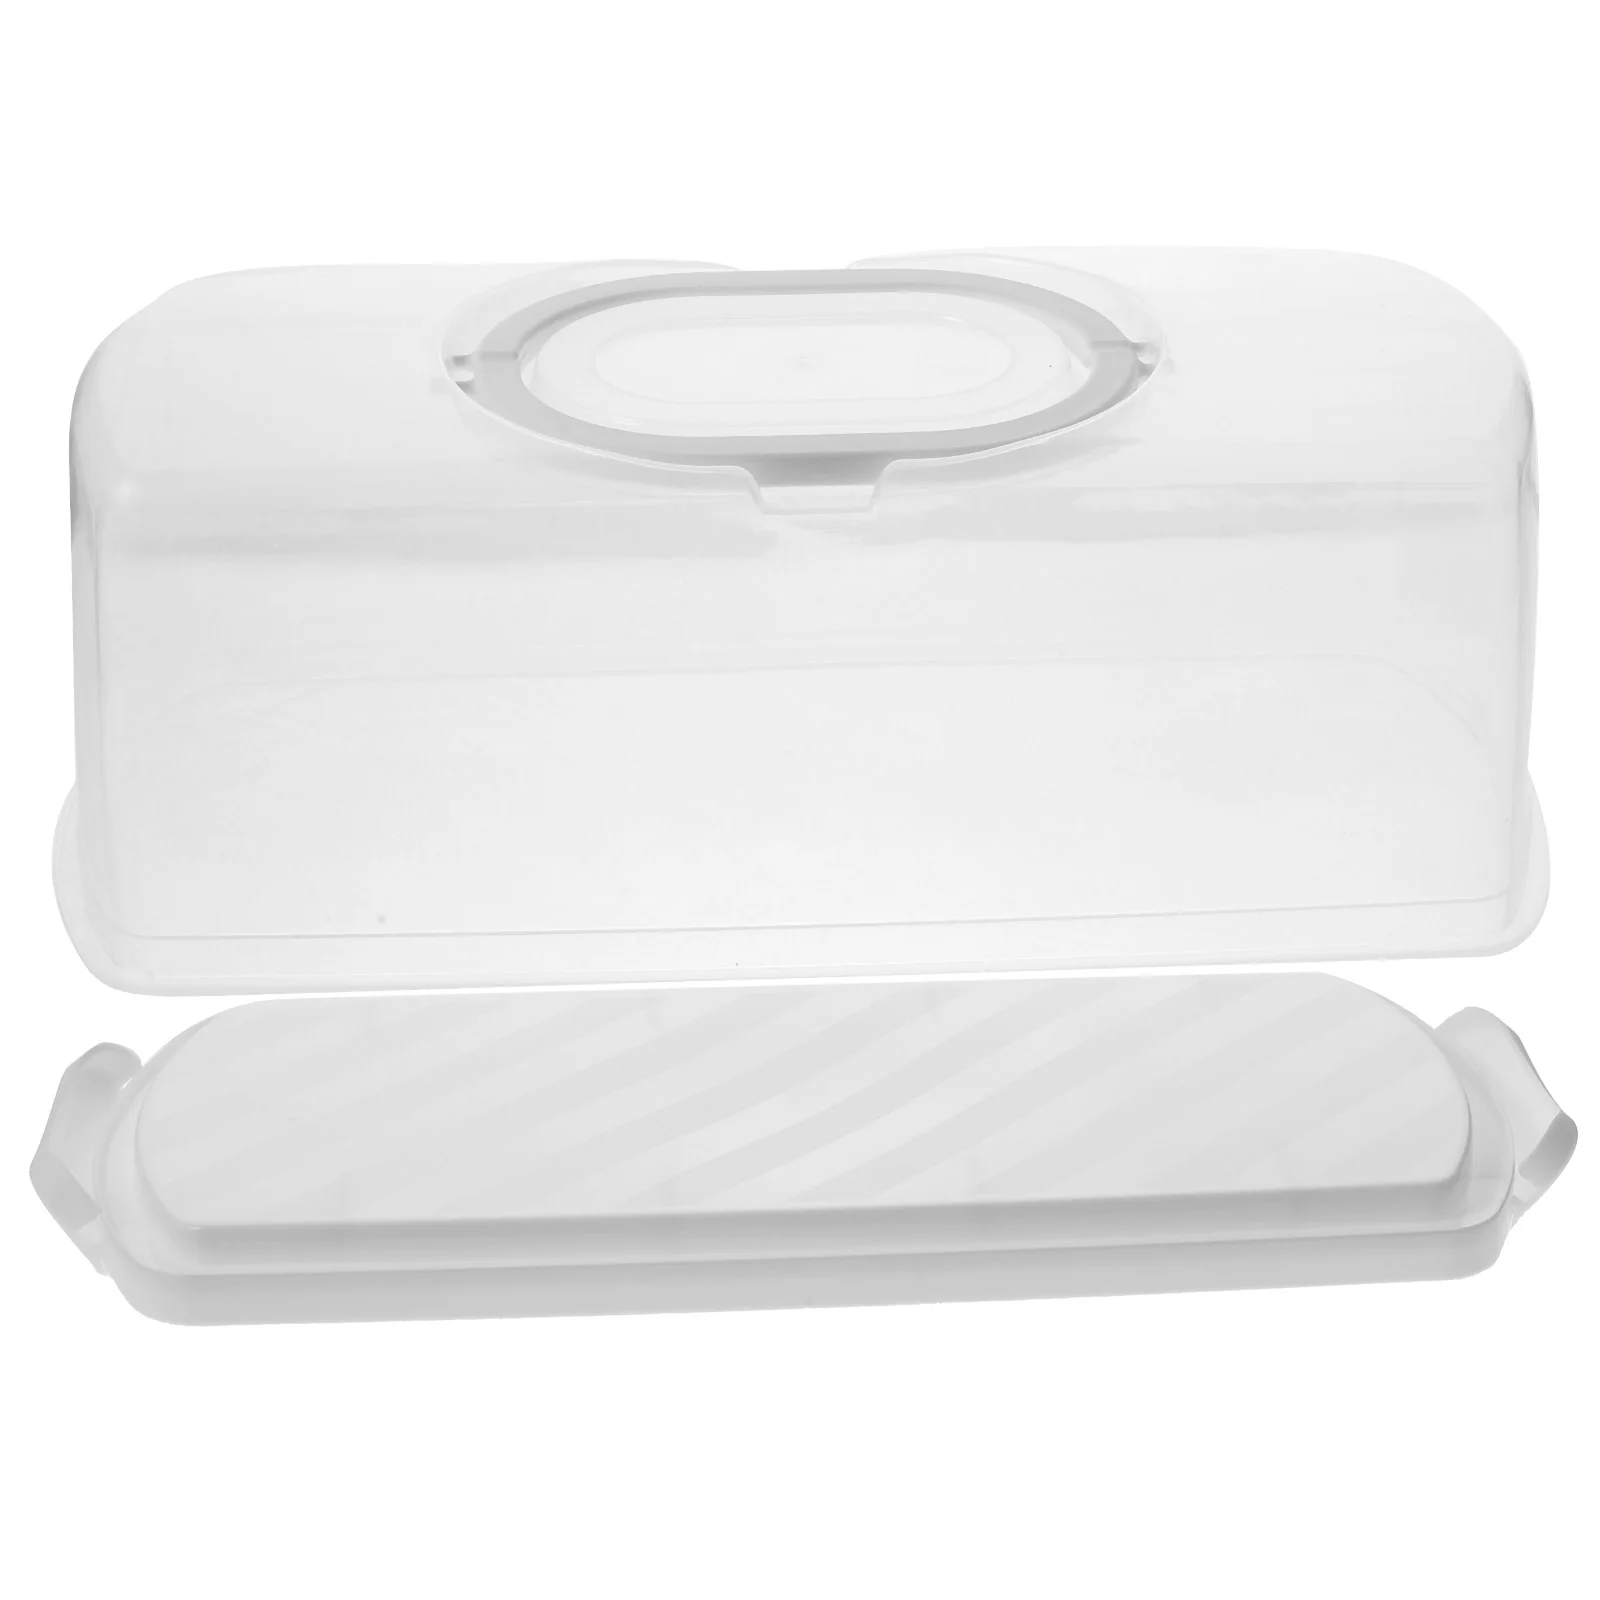 

Reusable Portable Cake Box Cake Carrying Case Multi-function Dessert Storage Box for Party